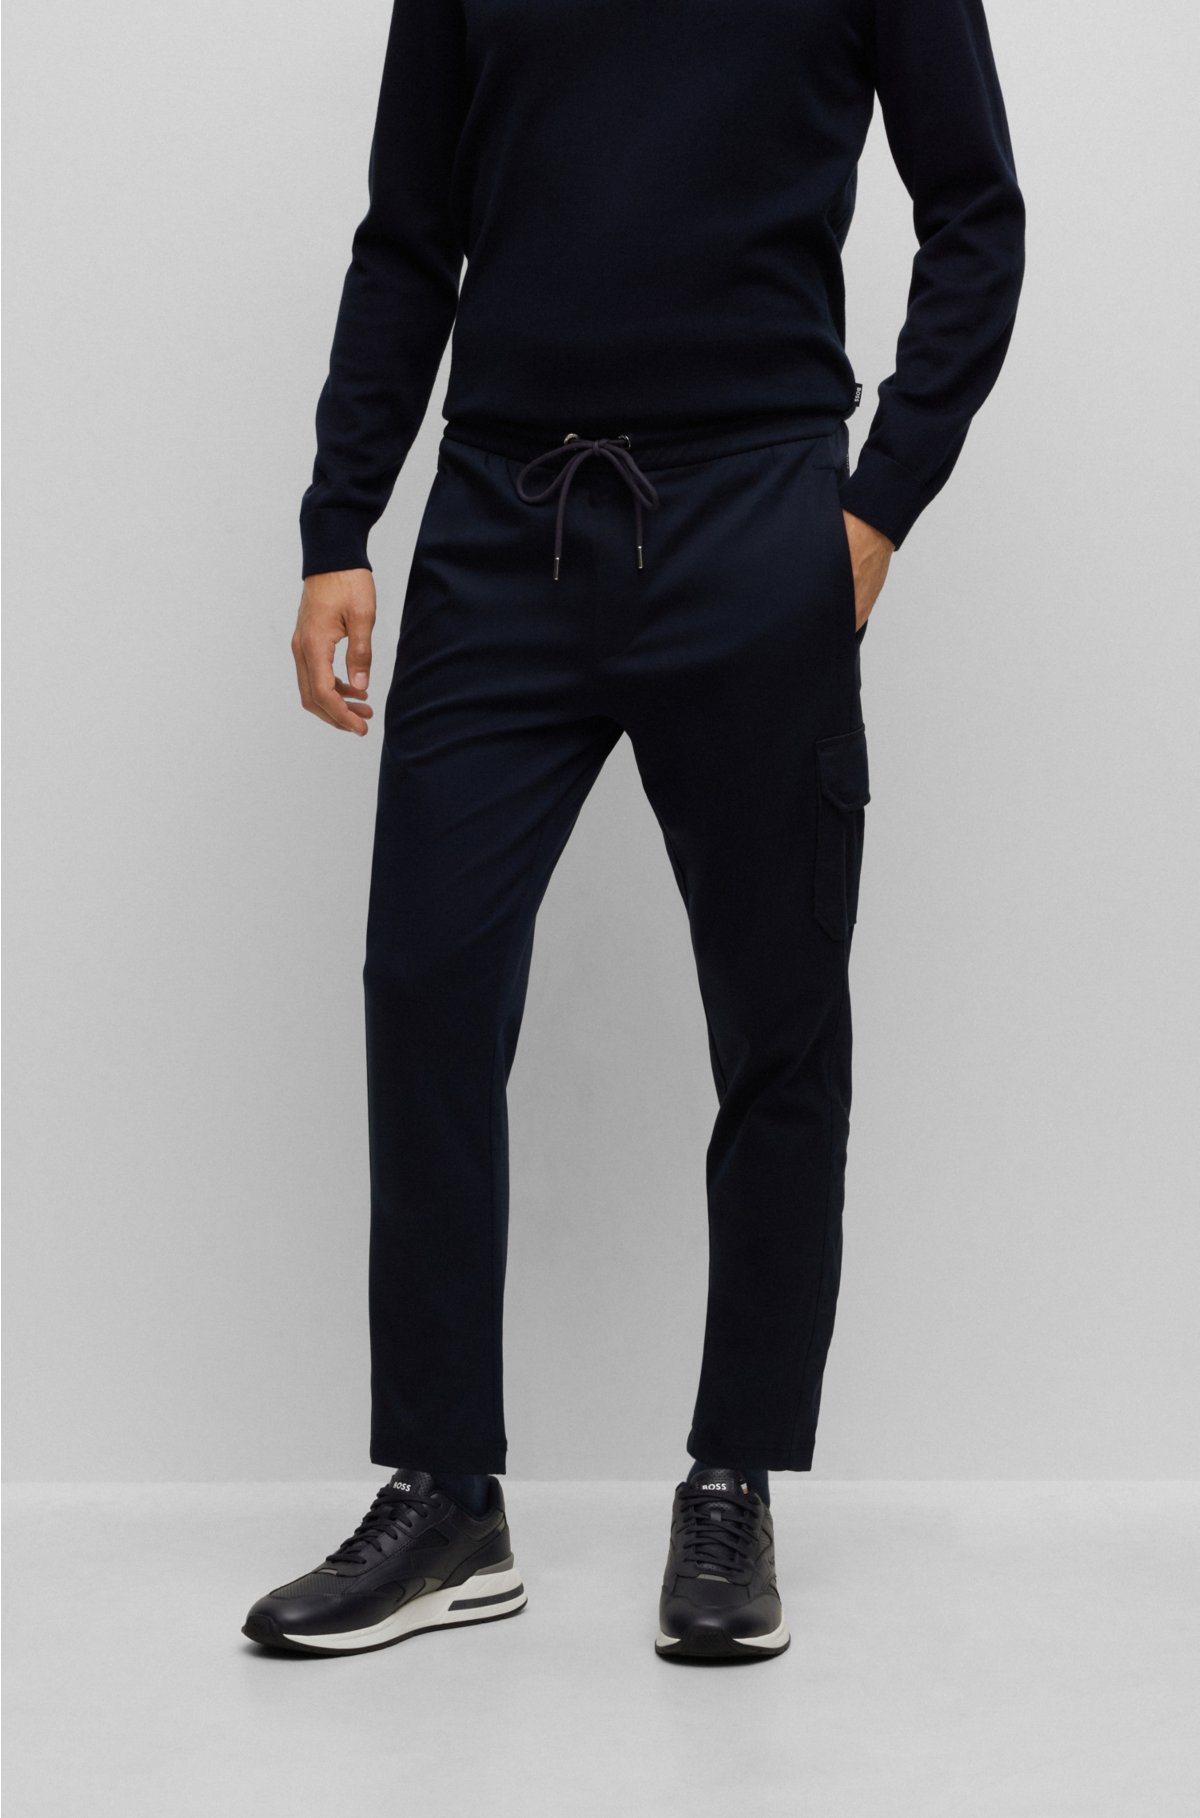 Mercerized-cotton tracksuit bottoms with insert details